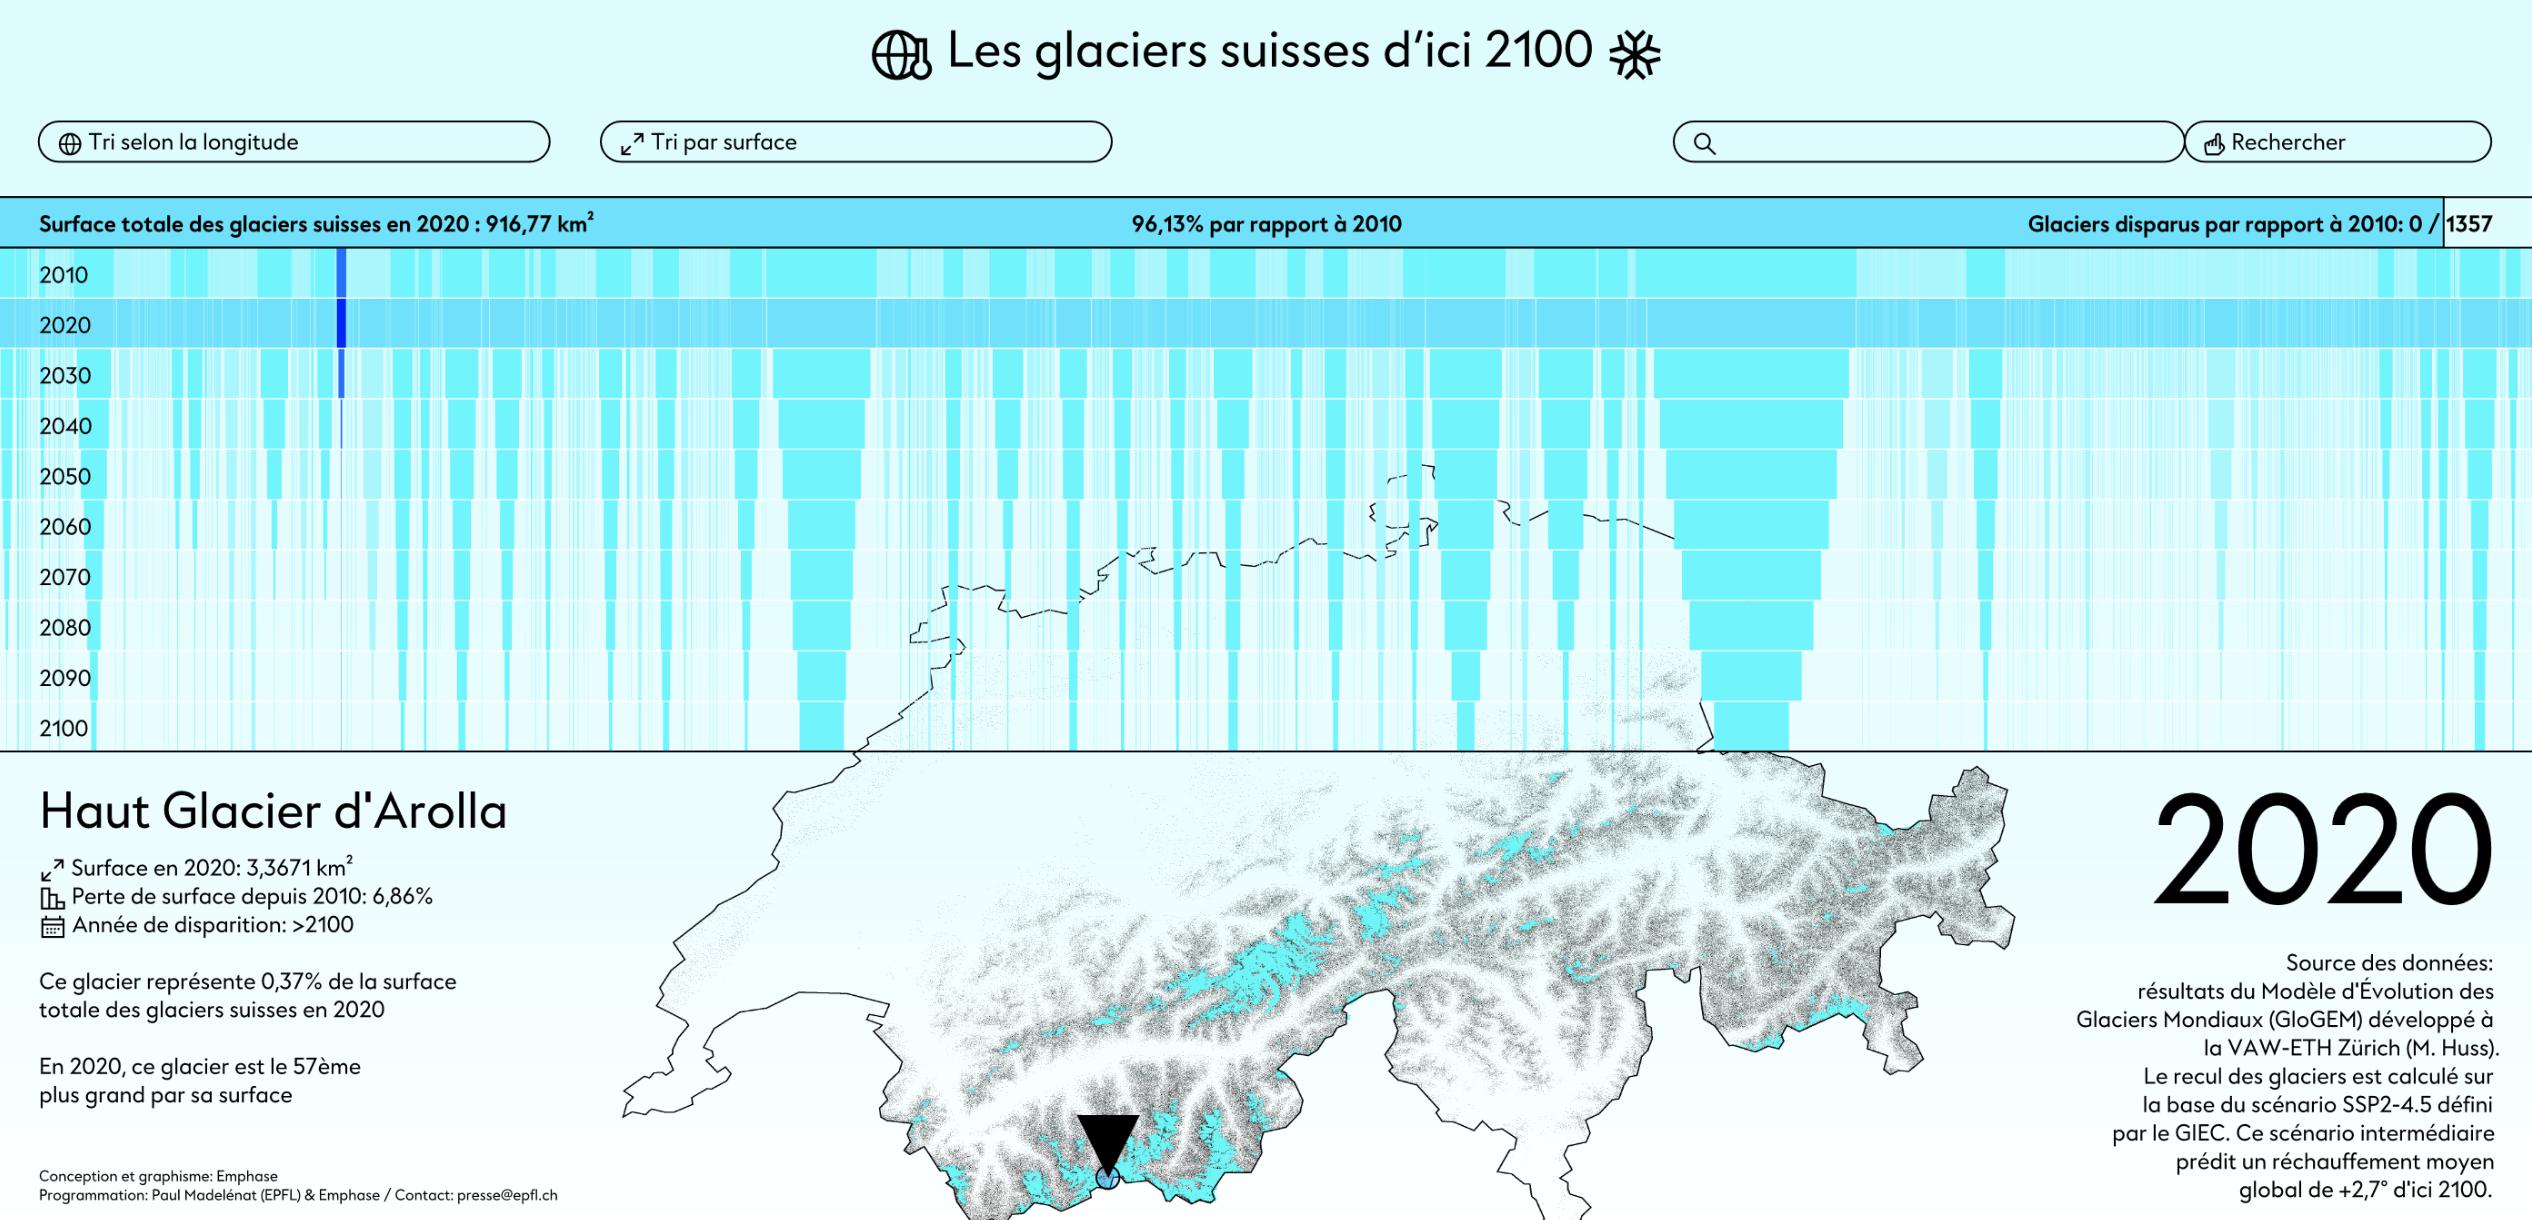 An infographic showing the extent of Swiss glaciers by 2100.